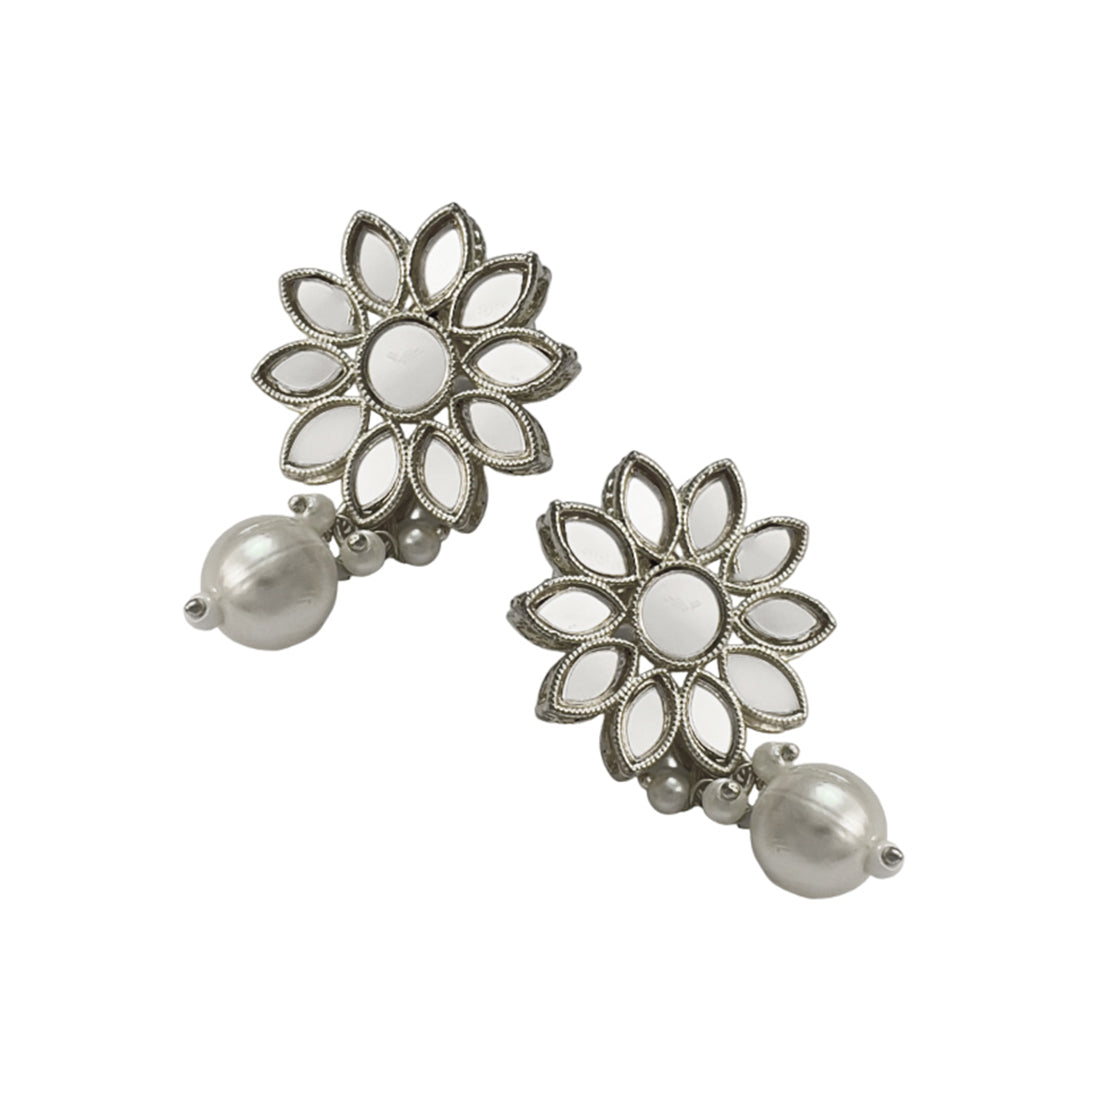 Flower Stud with Mirror Embellishments Silver-Toned Pearl Drop Earrings